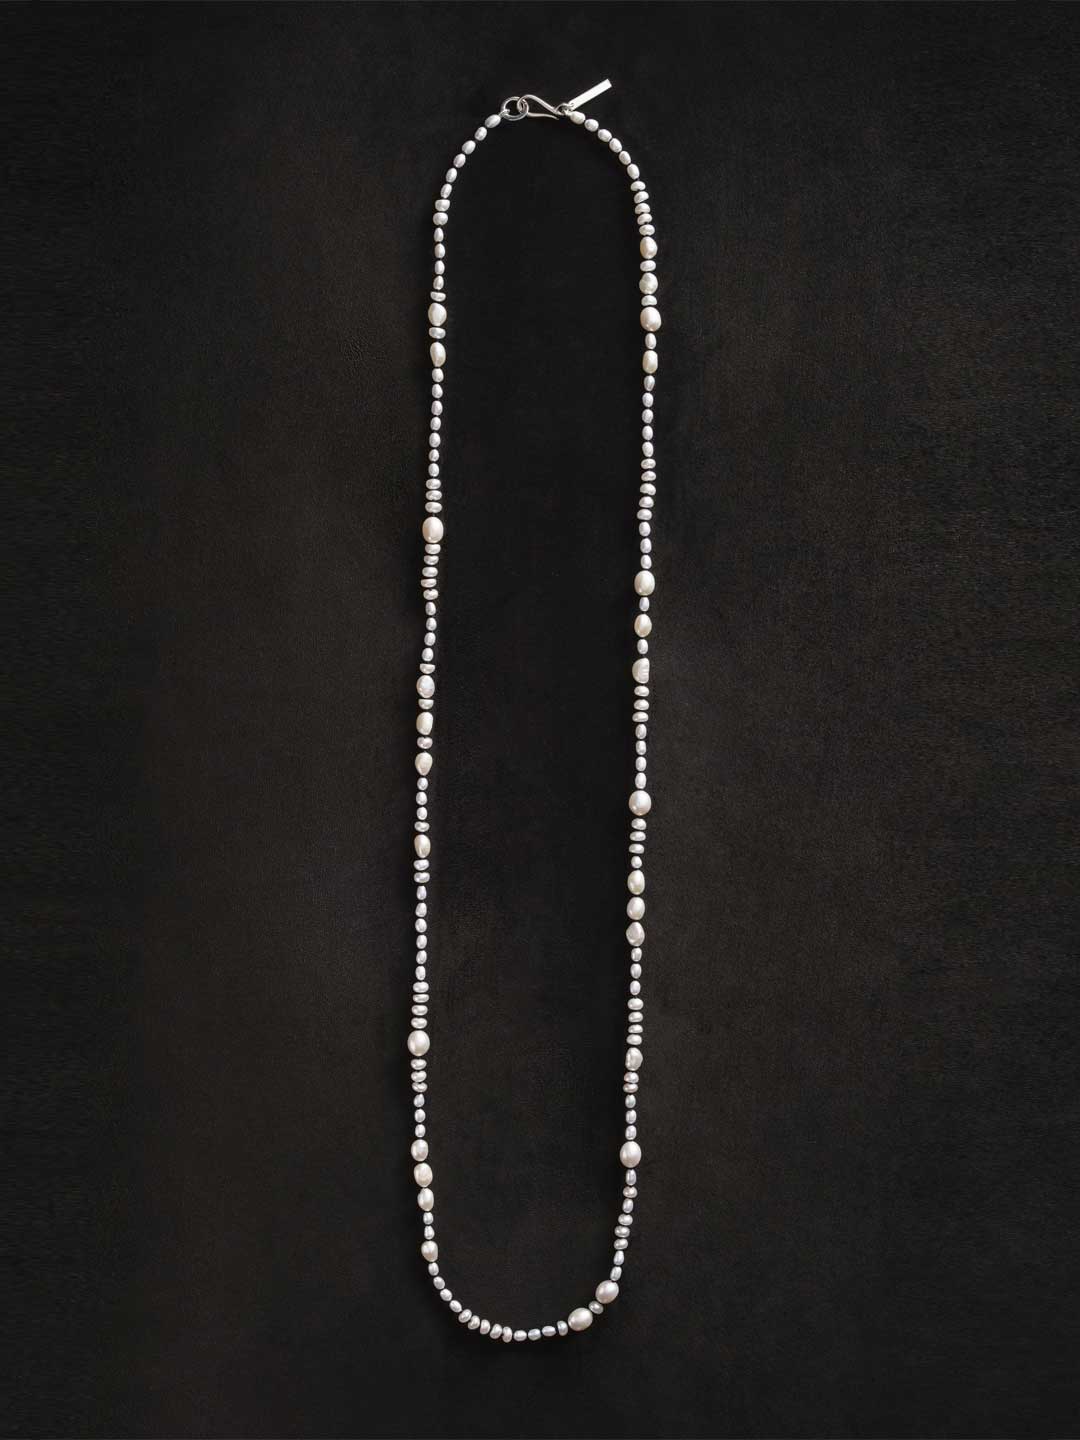 White Pearl Mermaid Necklace 76cm - Silver